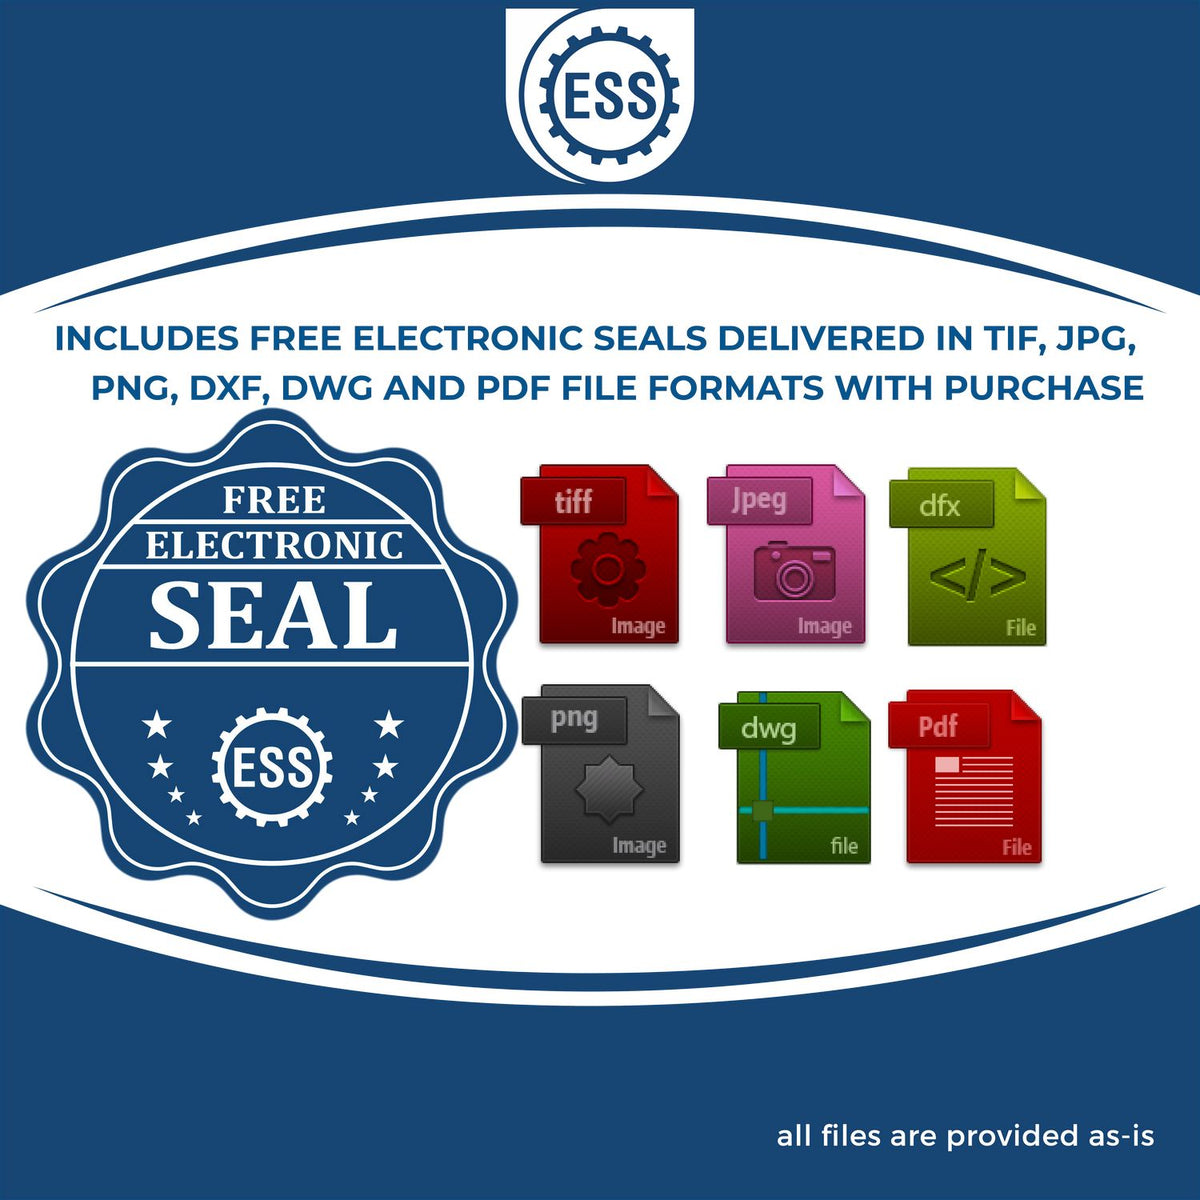 An infographic for the free electronic seal for the Minnesota Professional Engineer Seal Stamp illustrating the different file type icons such as DXF, DWG, TIF, JPG and PNG.